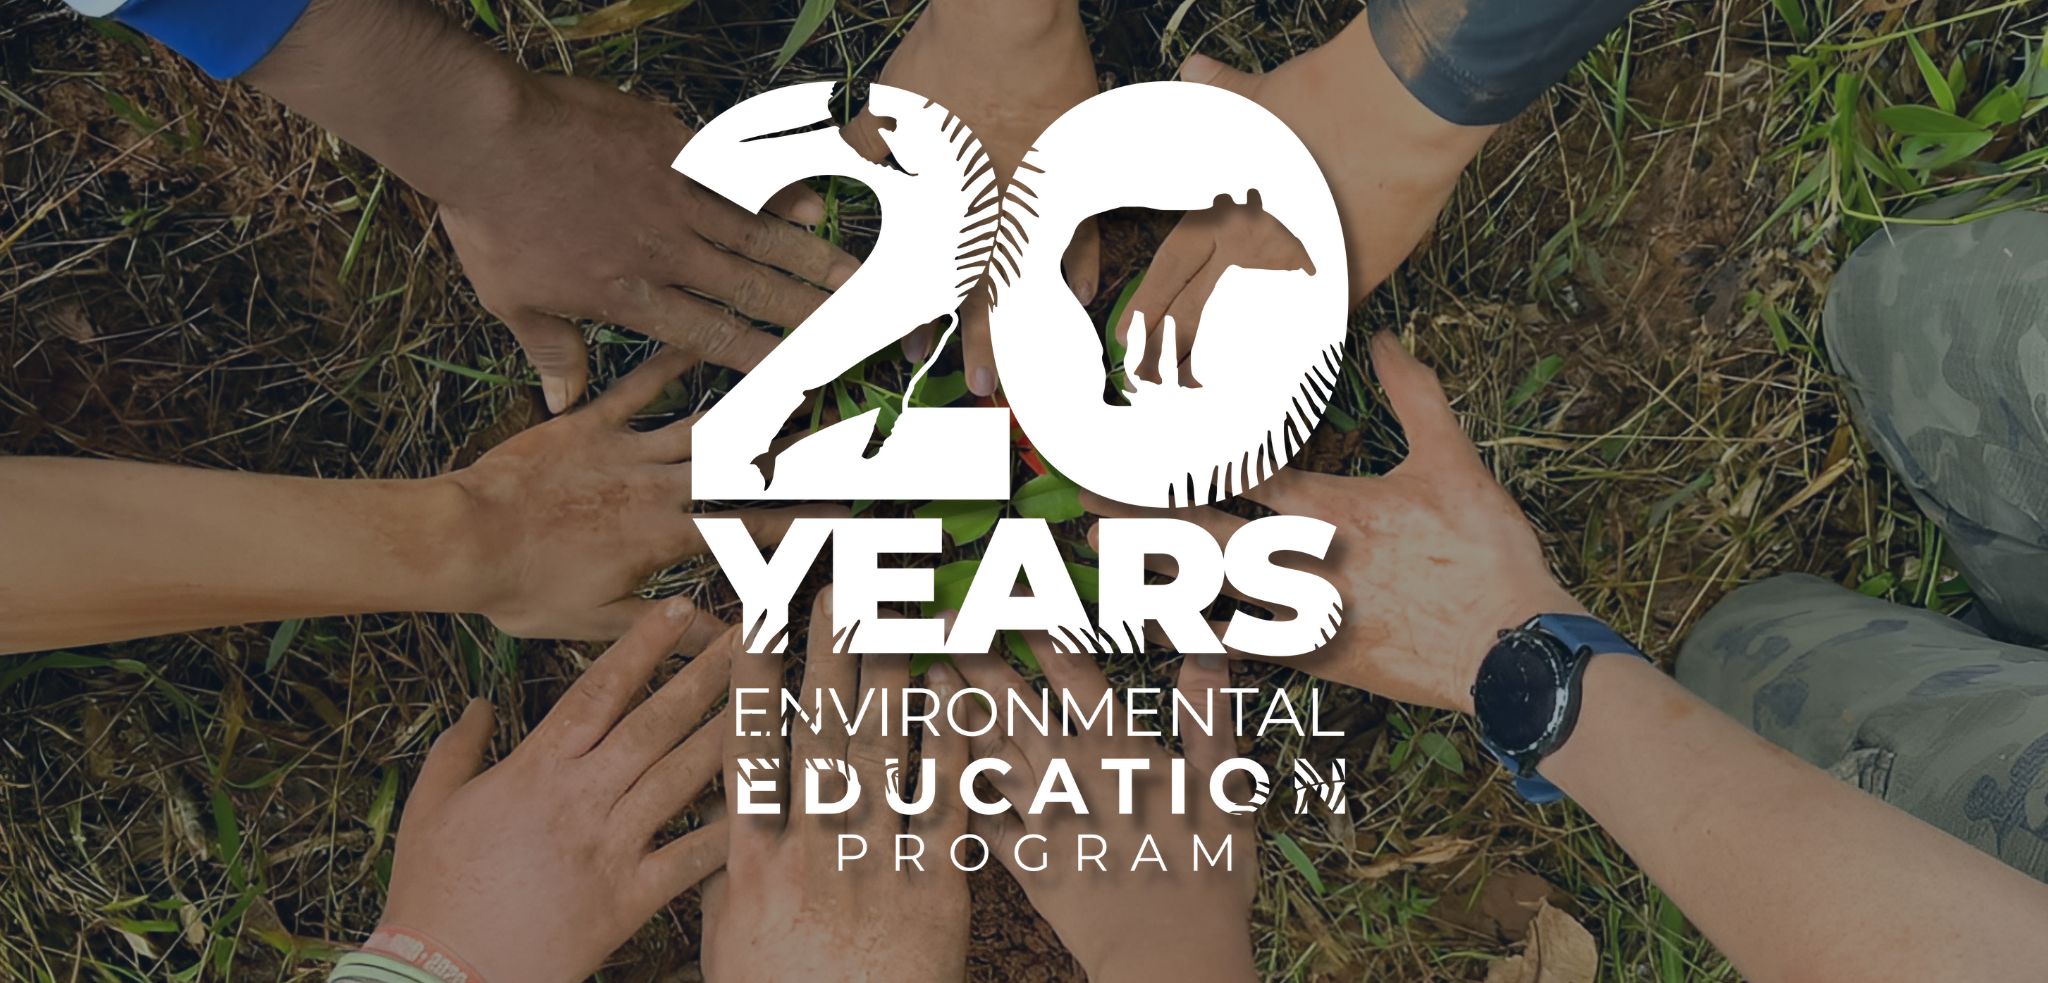 What does 20 years of the Foundation’s impact look like?